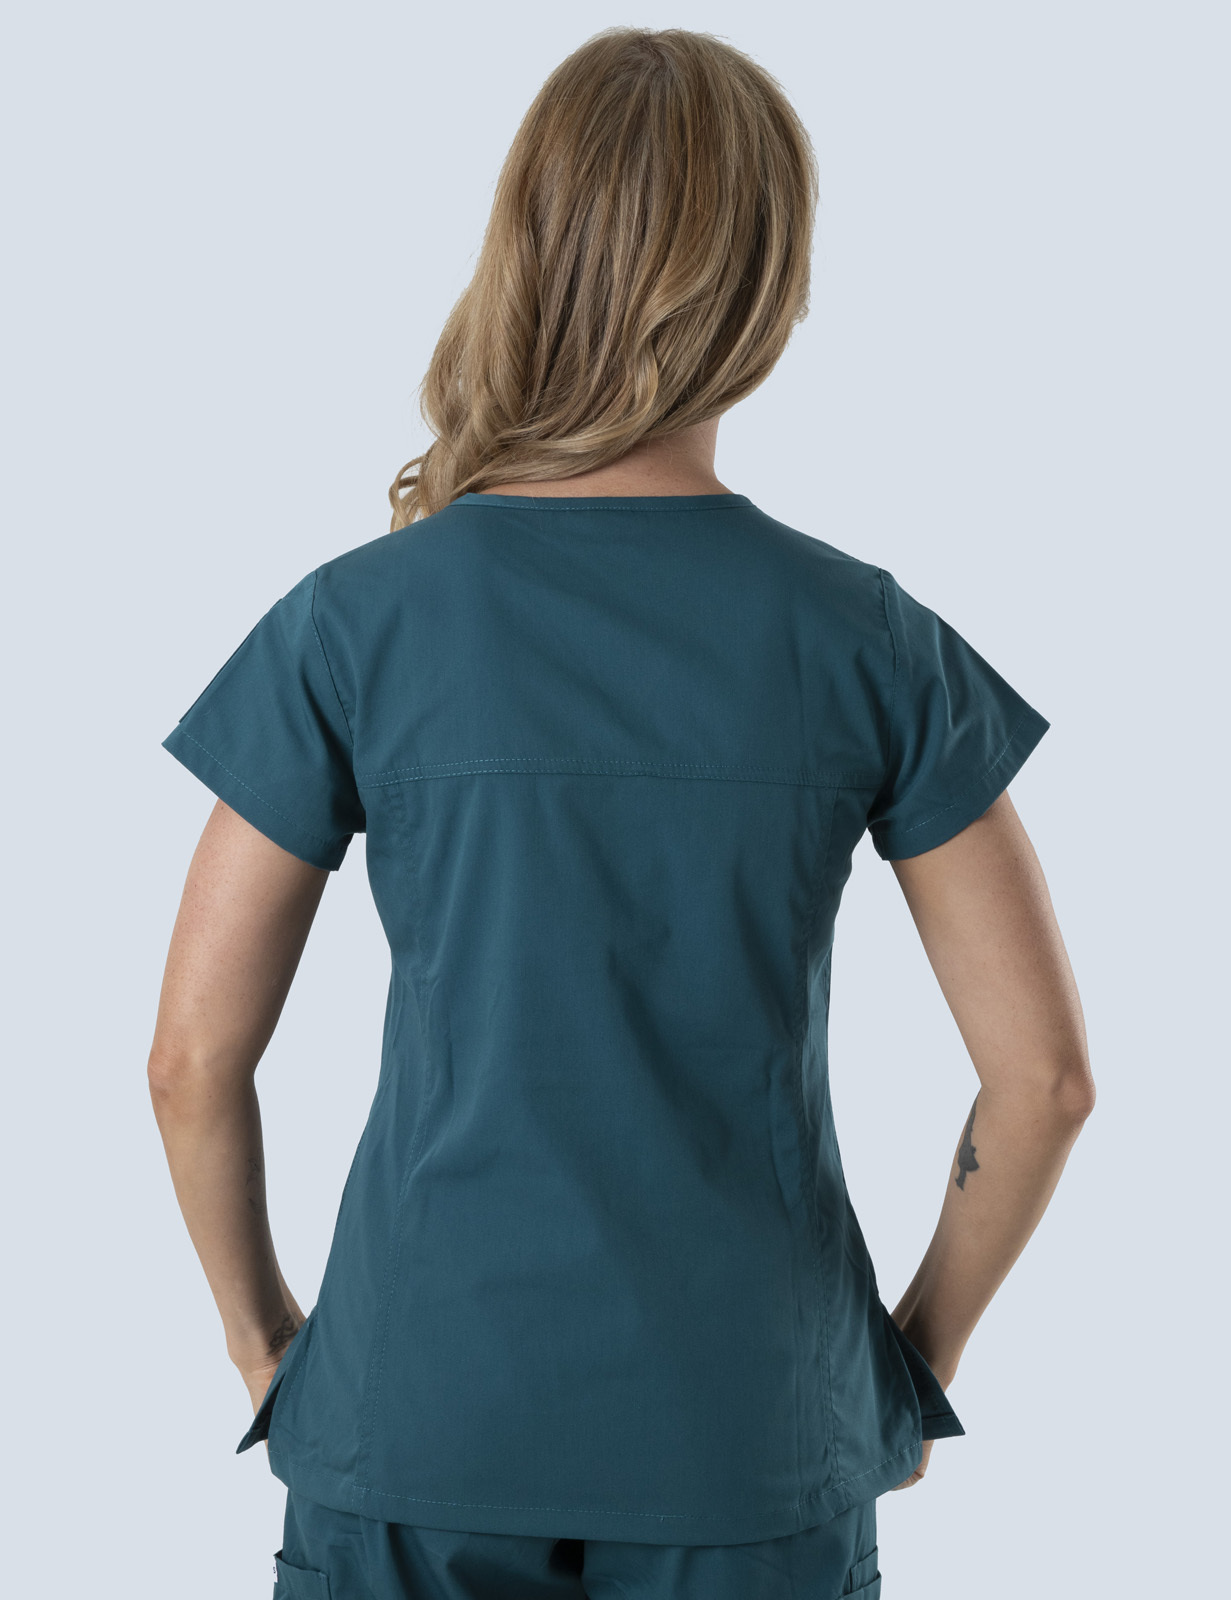 Women's Fit Solid Scrub Top - Caribbean - X Large